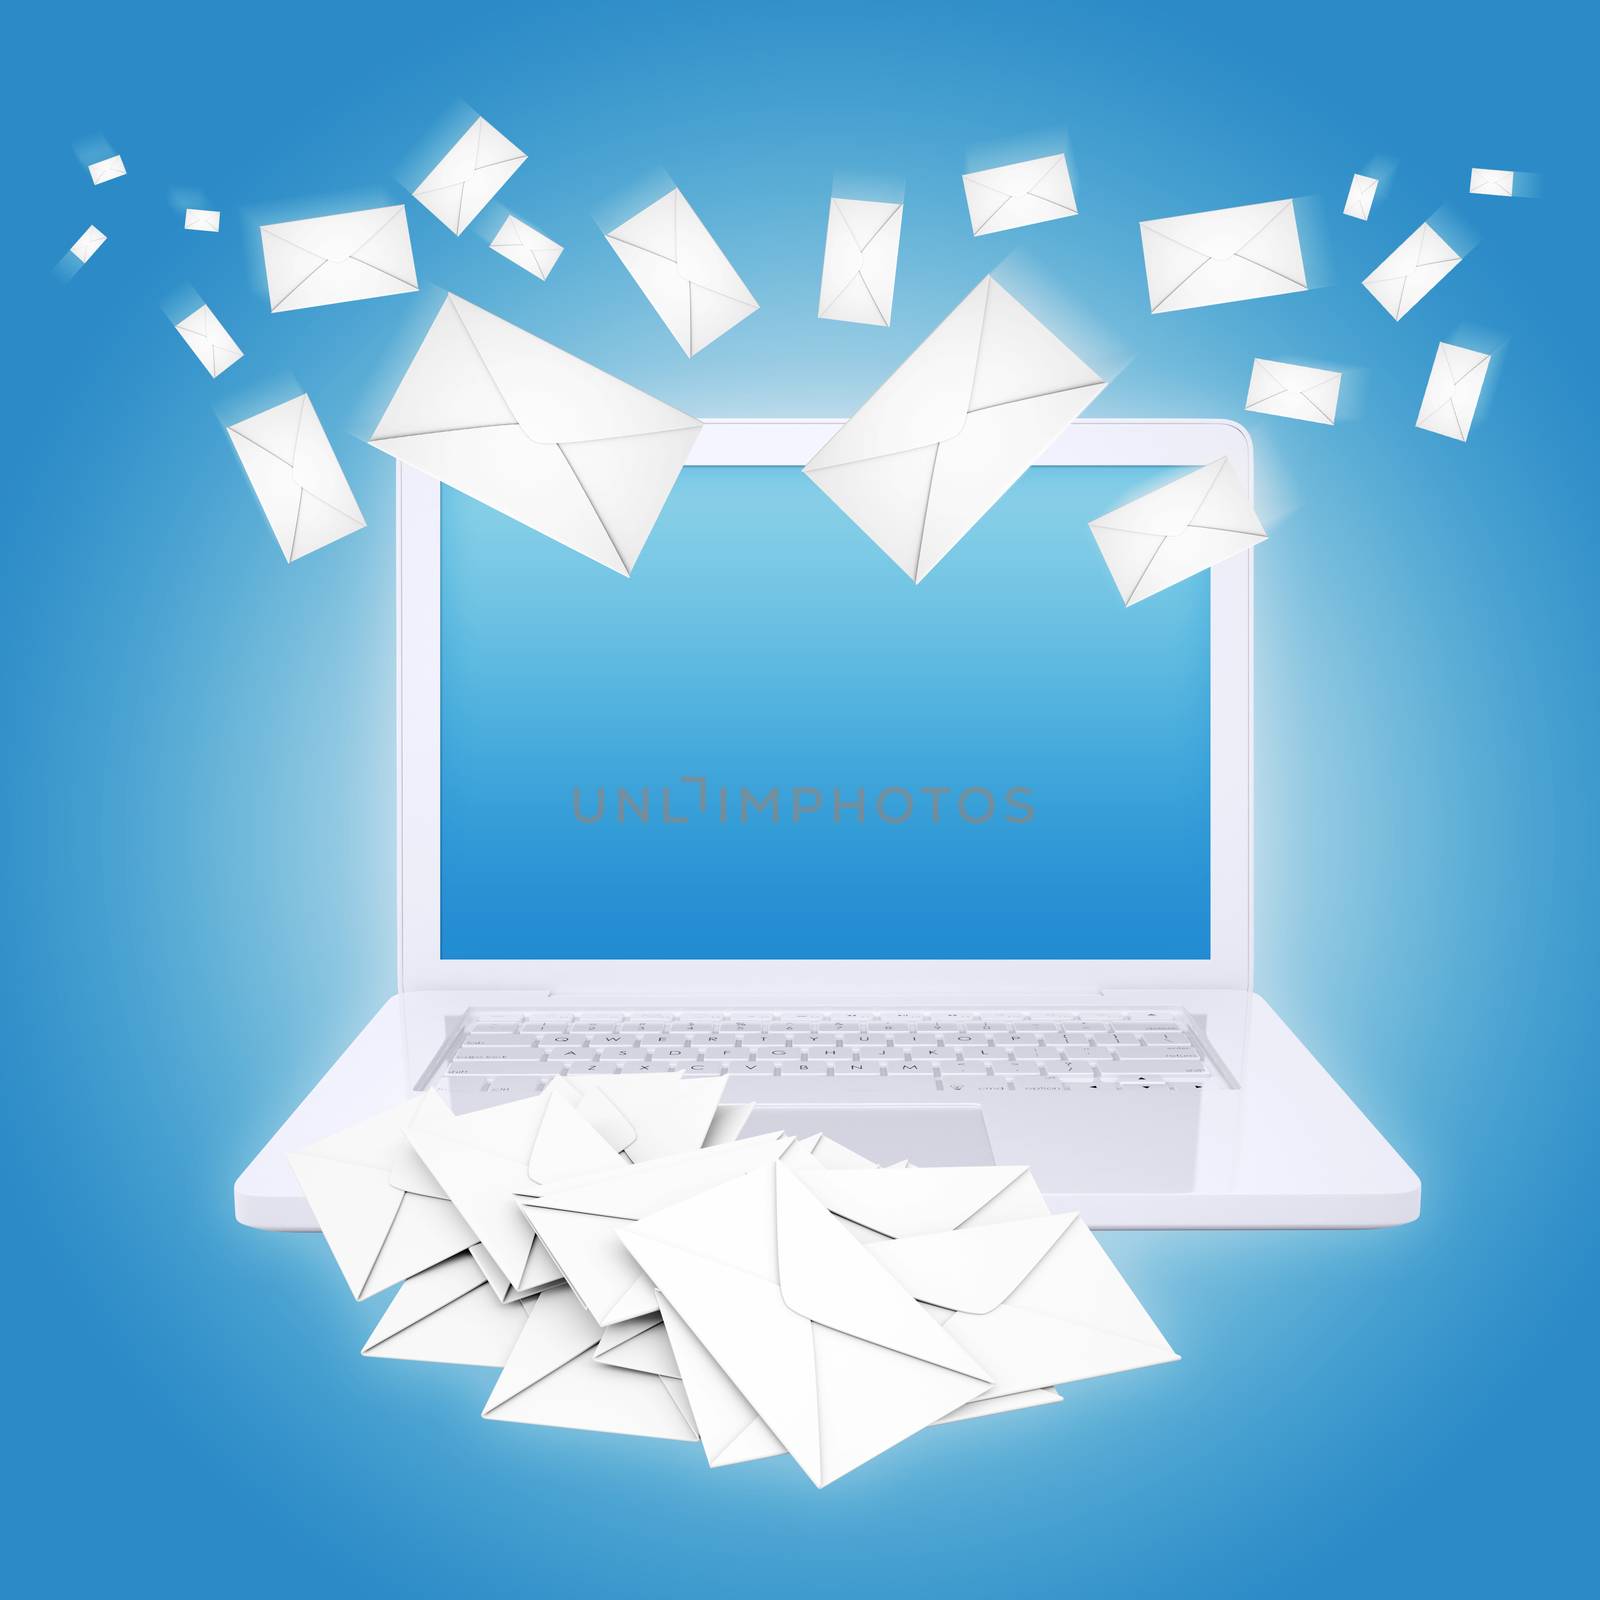 Many envelopes and laptop. The concept of email technology